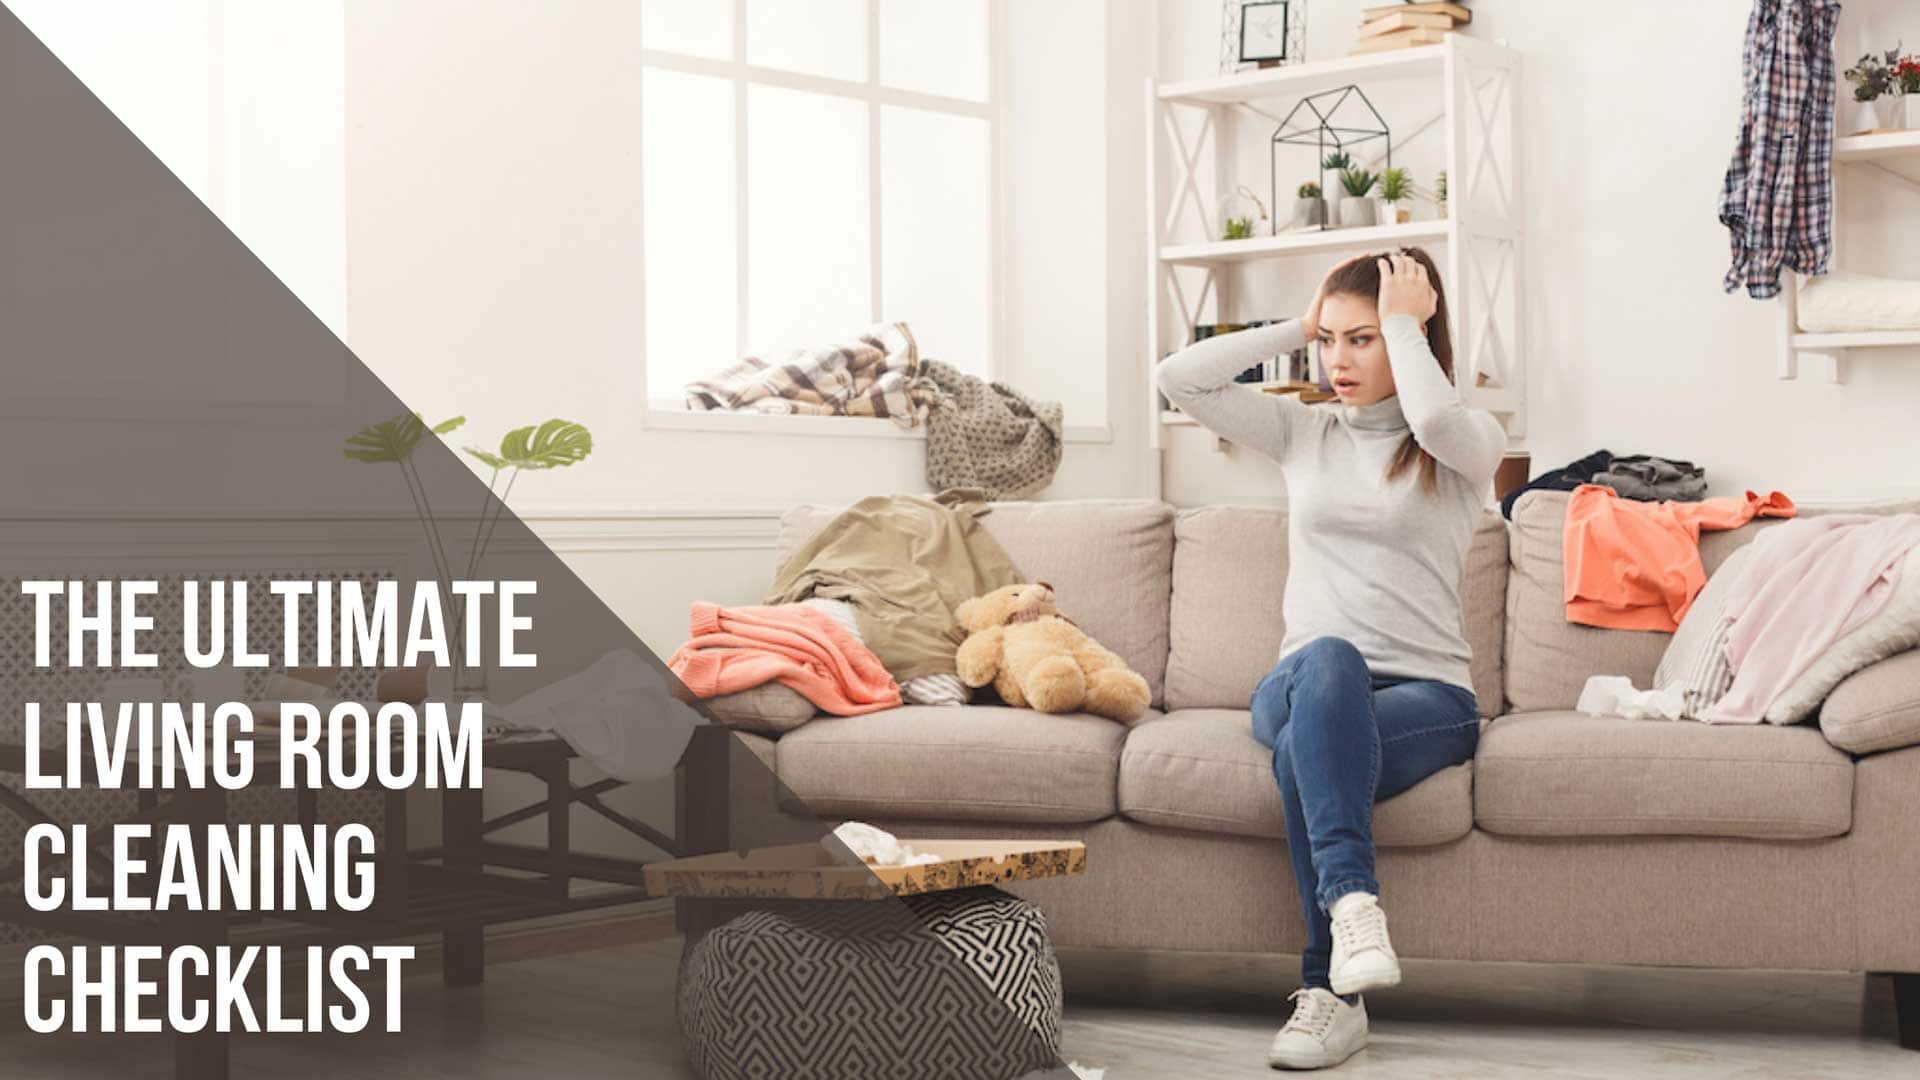 The Ultimate Living Room Cleaning Checklist